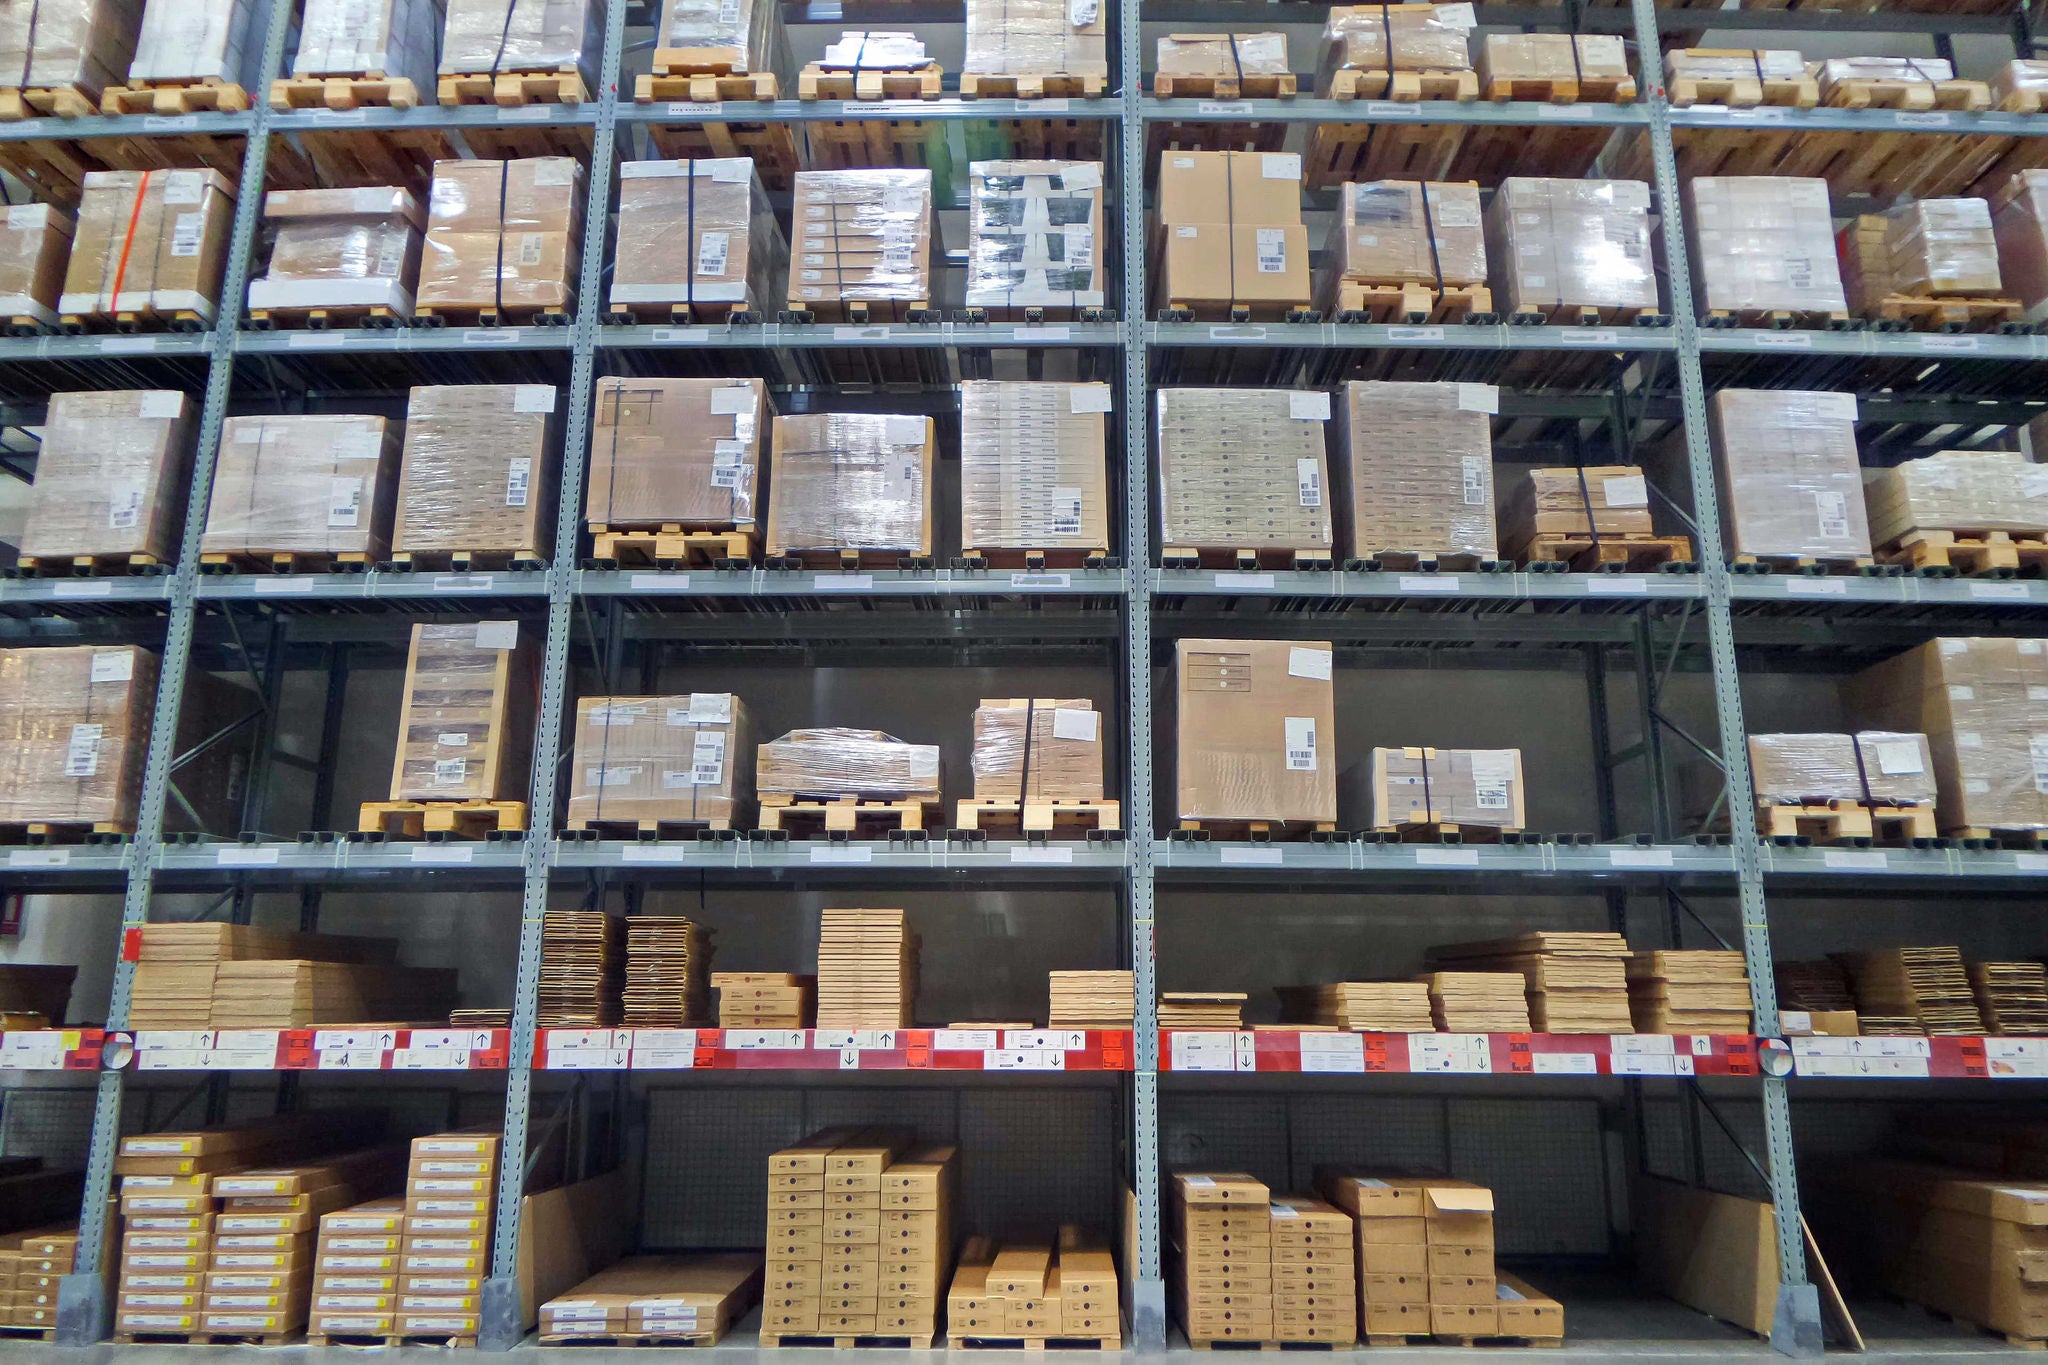 EY - Shipping warehouse with stacks of boxes